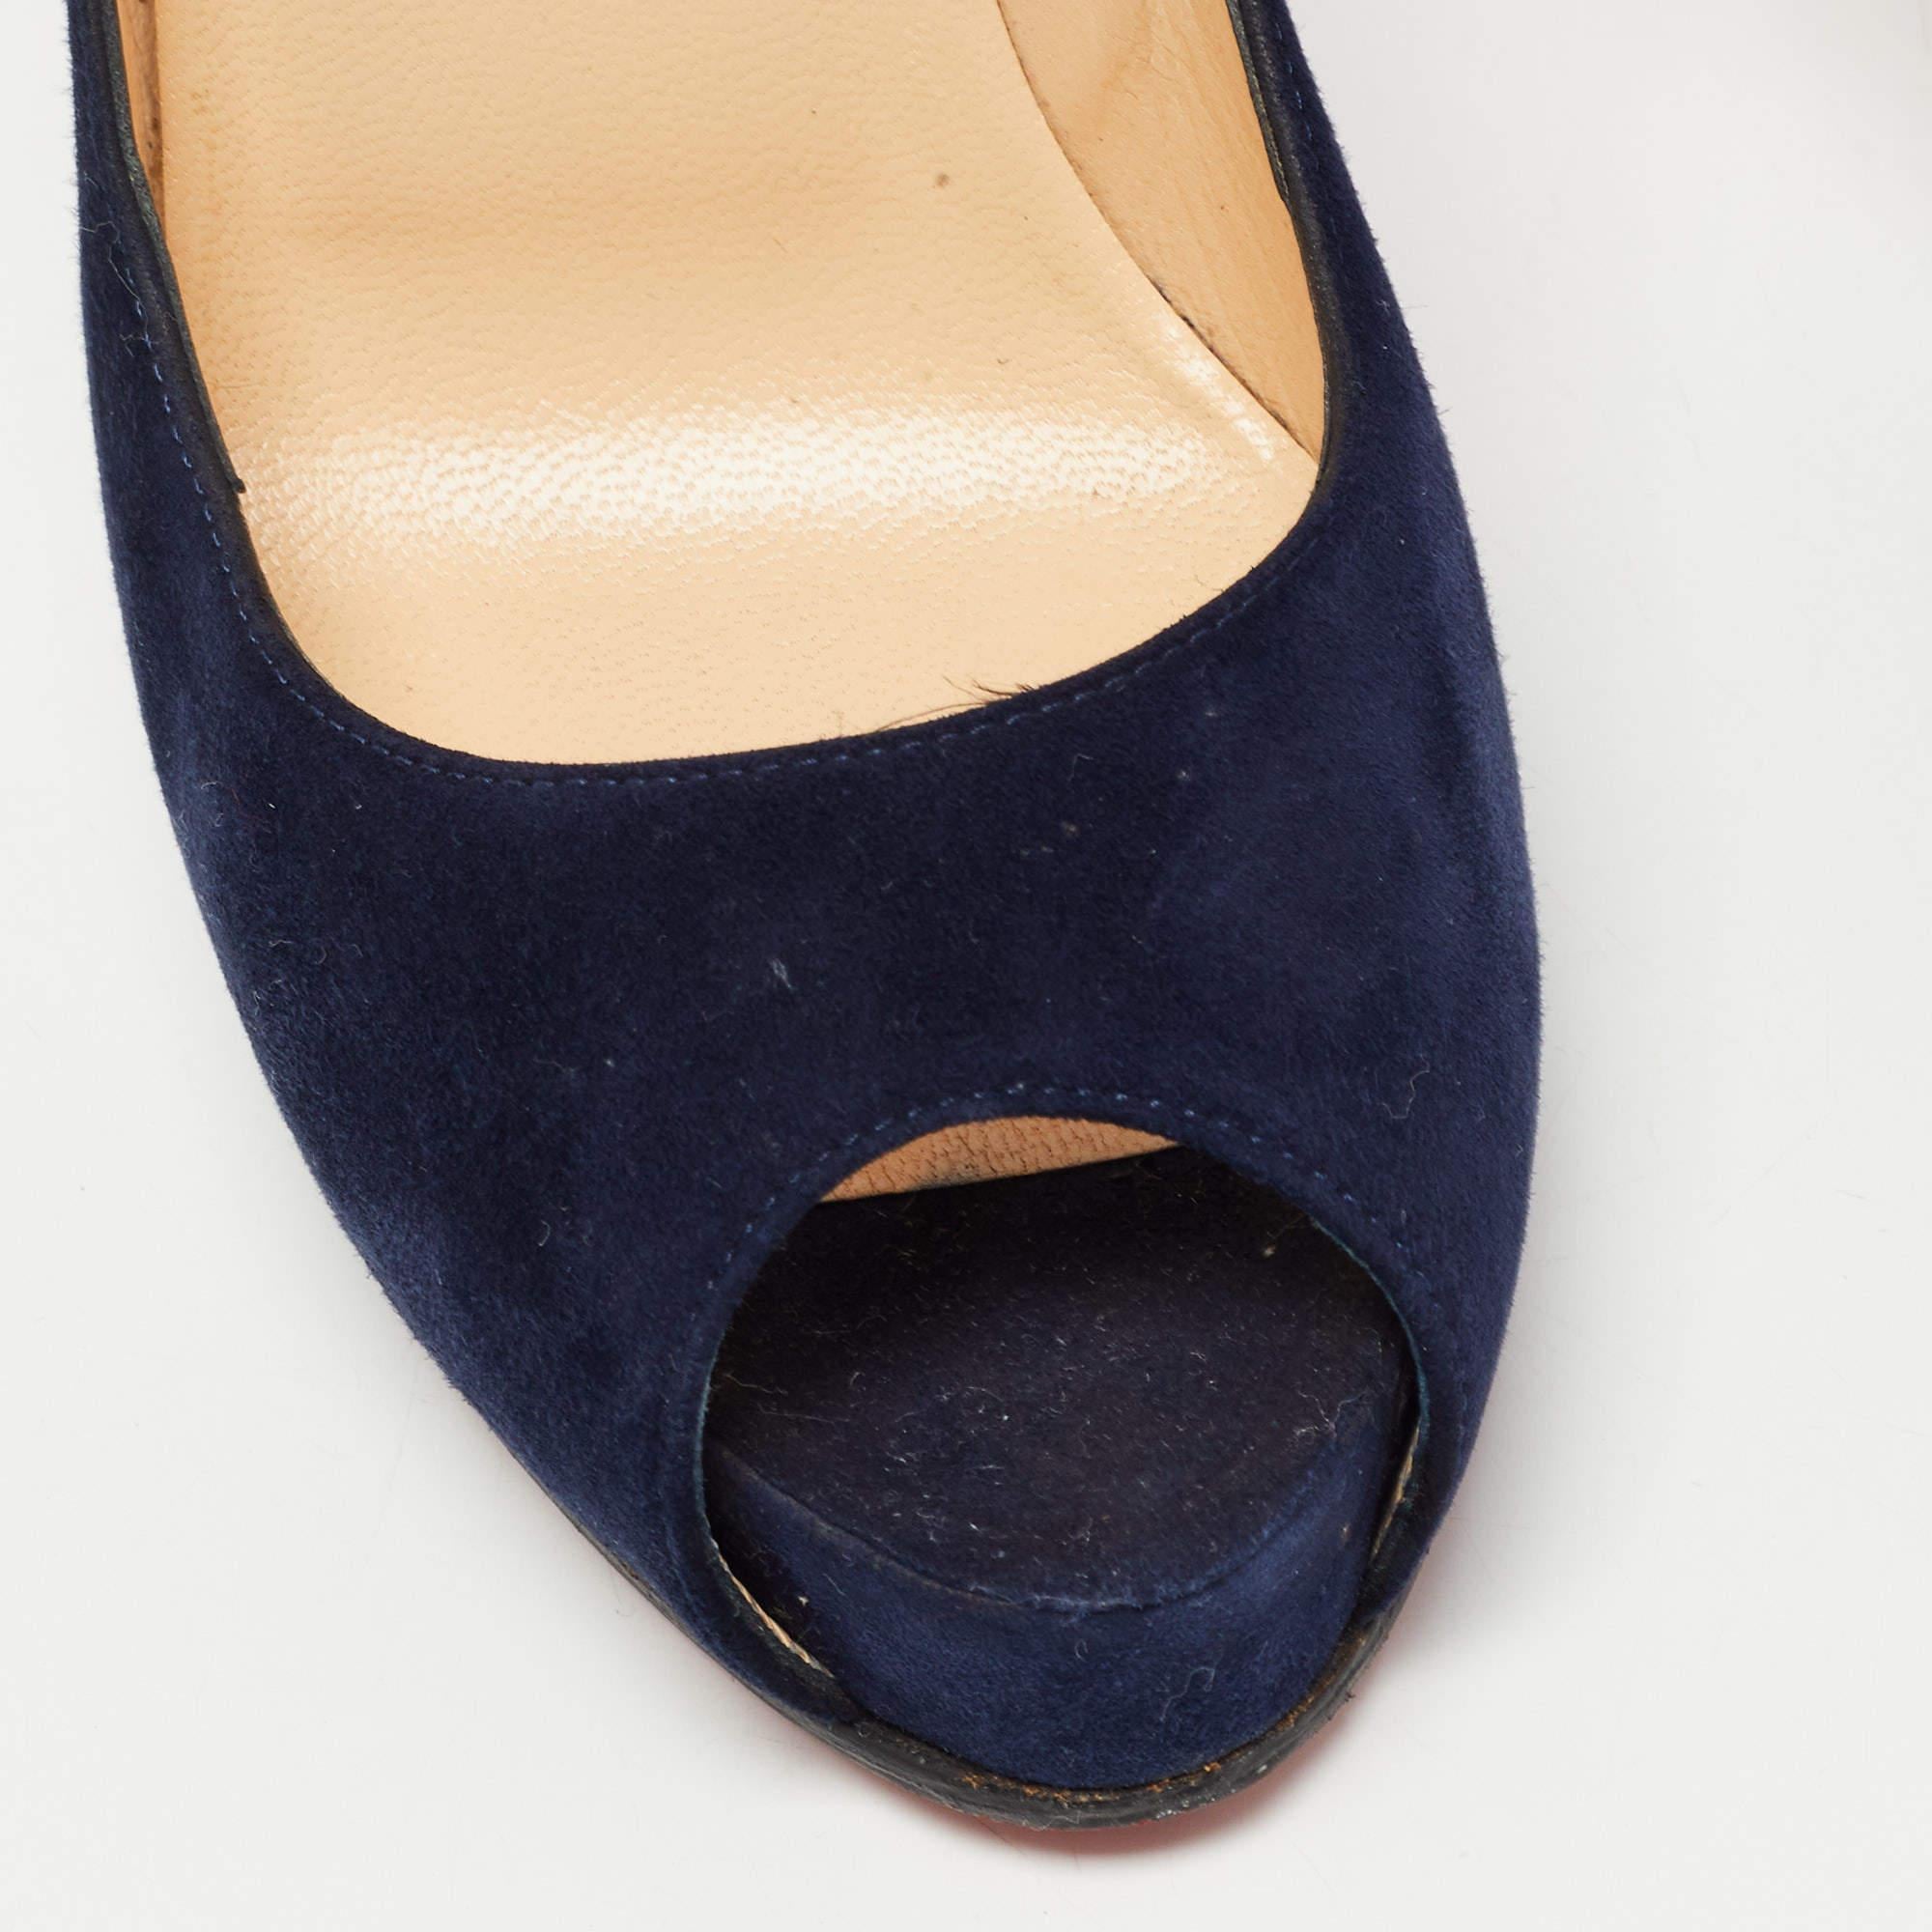 Women's Christian Louboutin Navy Blue Suede Very Prive Pumps Size 37.5